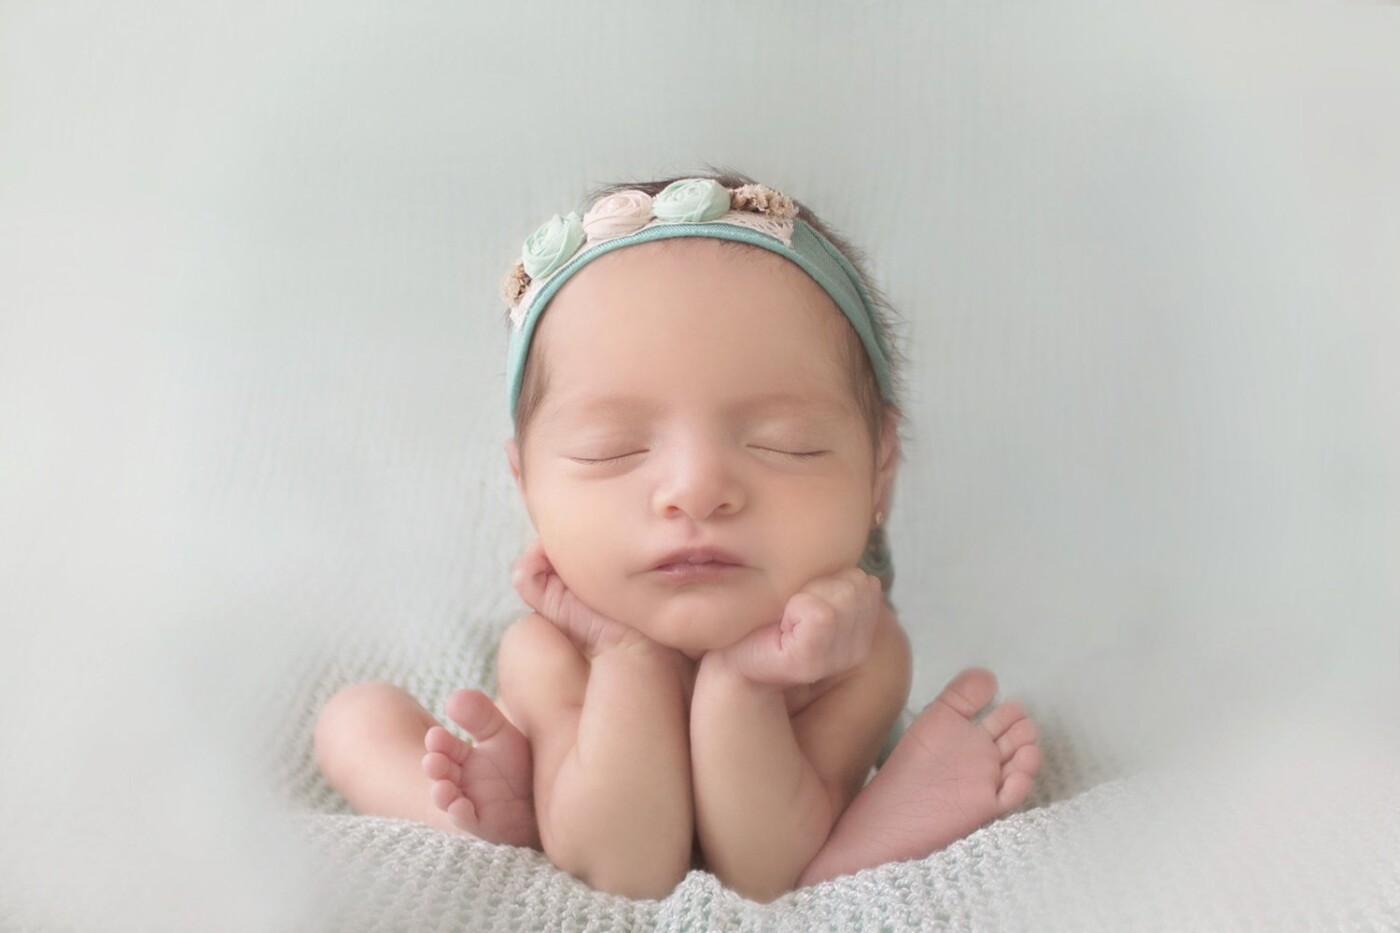 Sweet little Emma was 13 days new when she came to my studio for her newborn photoshoot. Mom and dad asked me to try a froggy pose with her. Luckily, she was very sleepy and dad helped all the time to get this beautiful image. I'm very happy with the final result. 